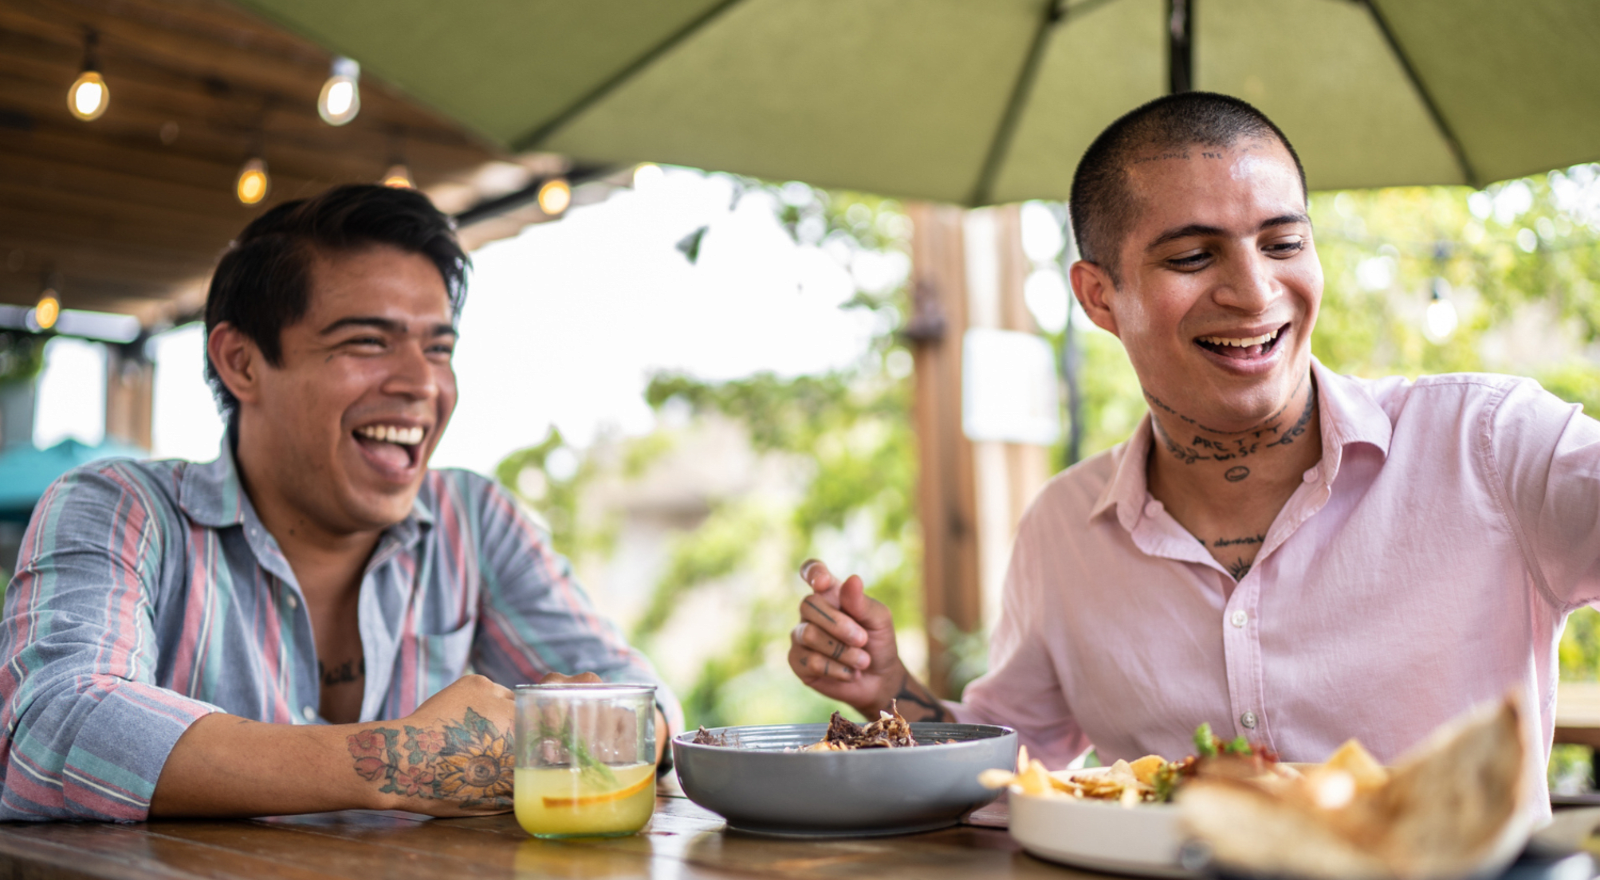 two men eating mexican food together and smiling